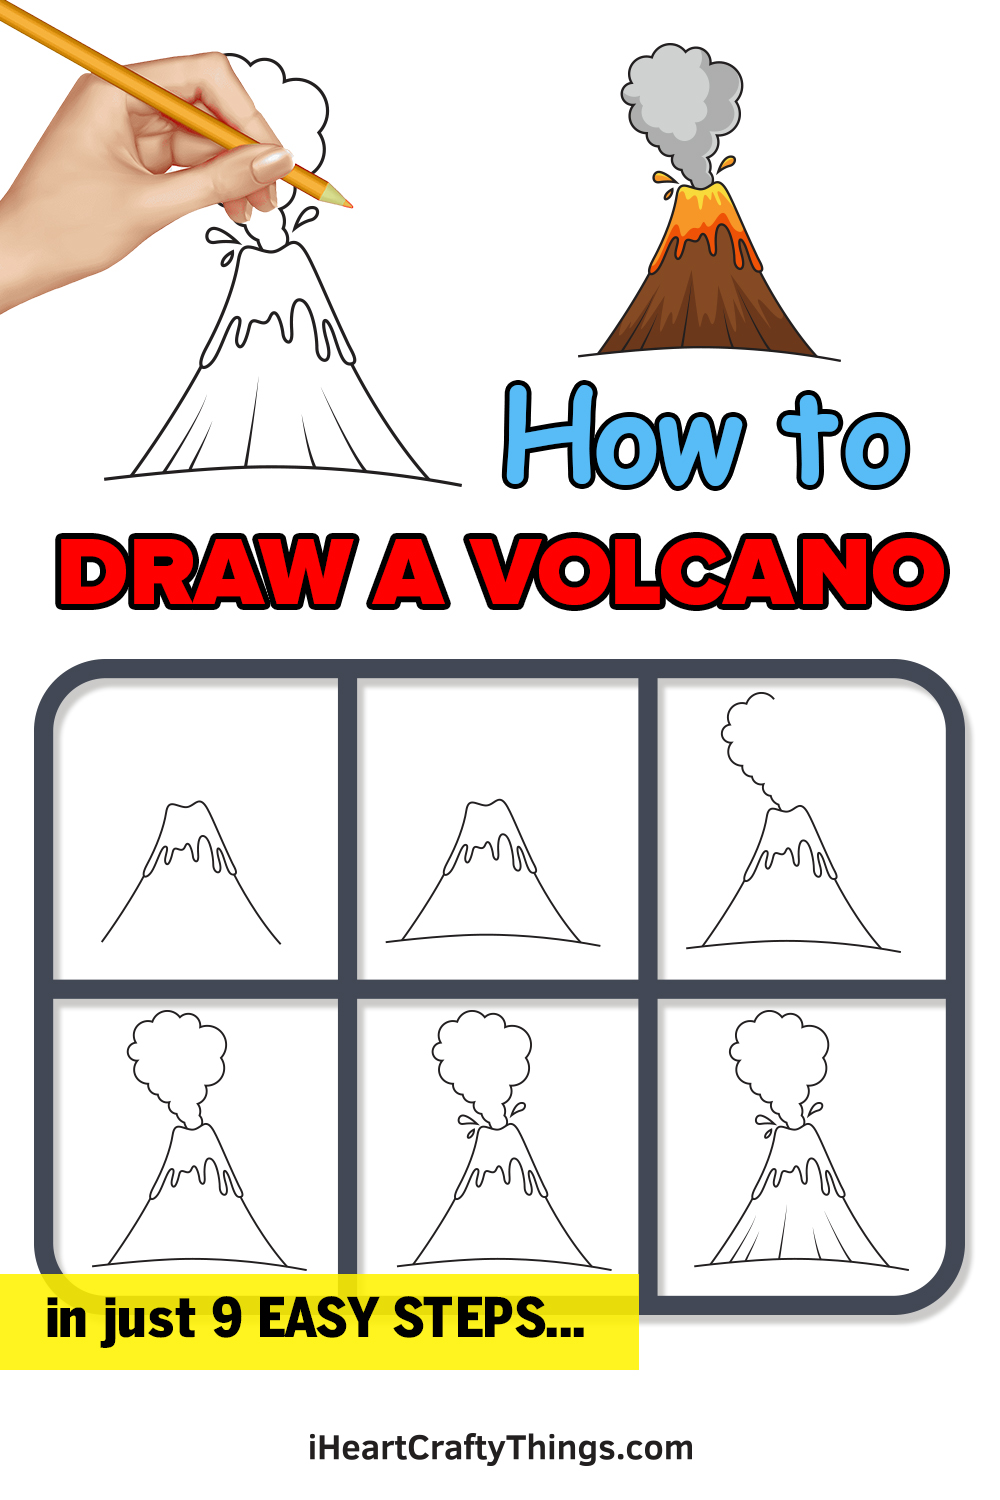 how to draw a volcano in 9 easy steps